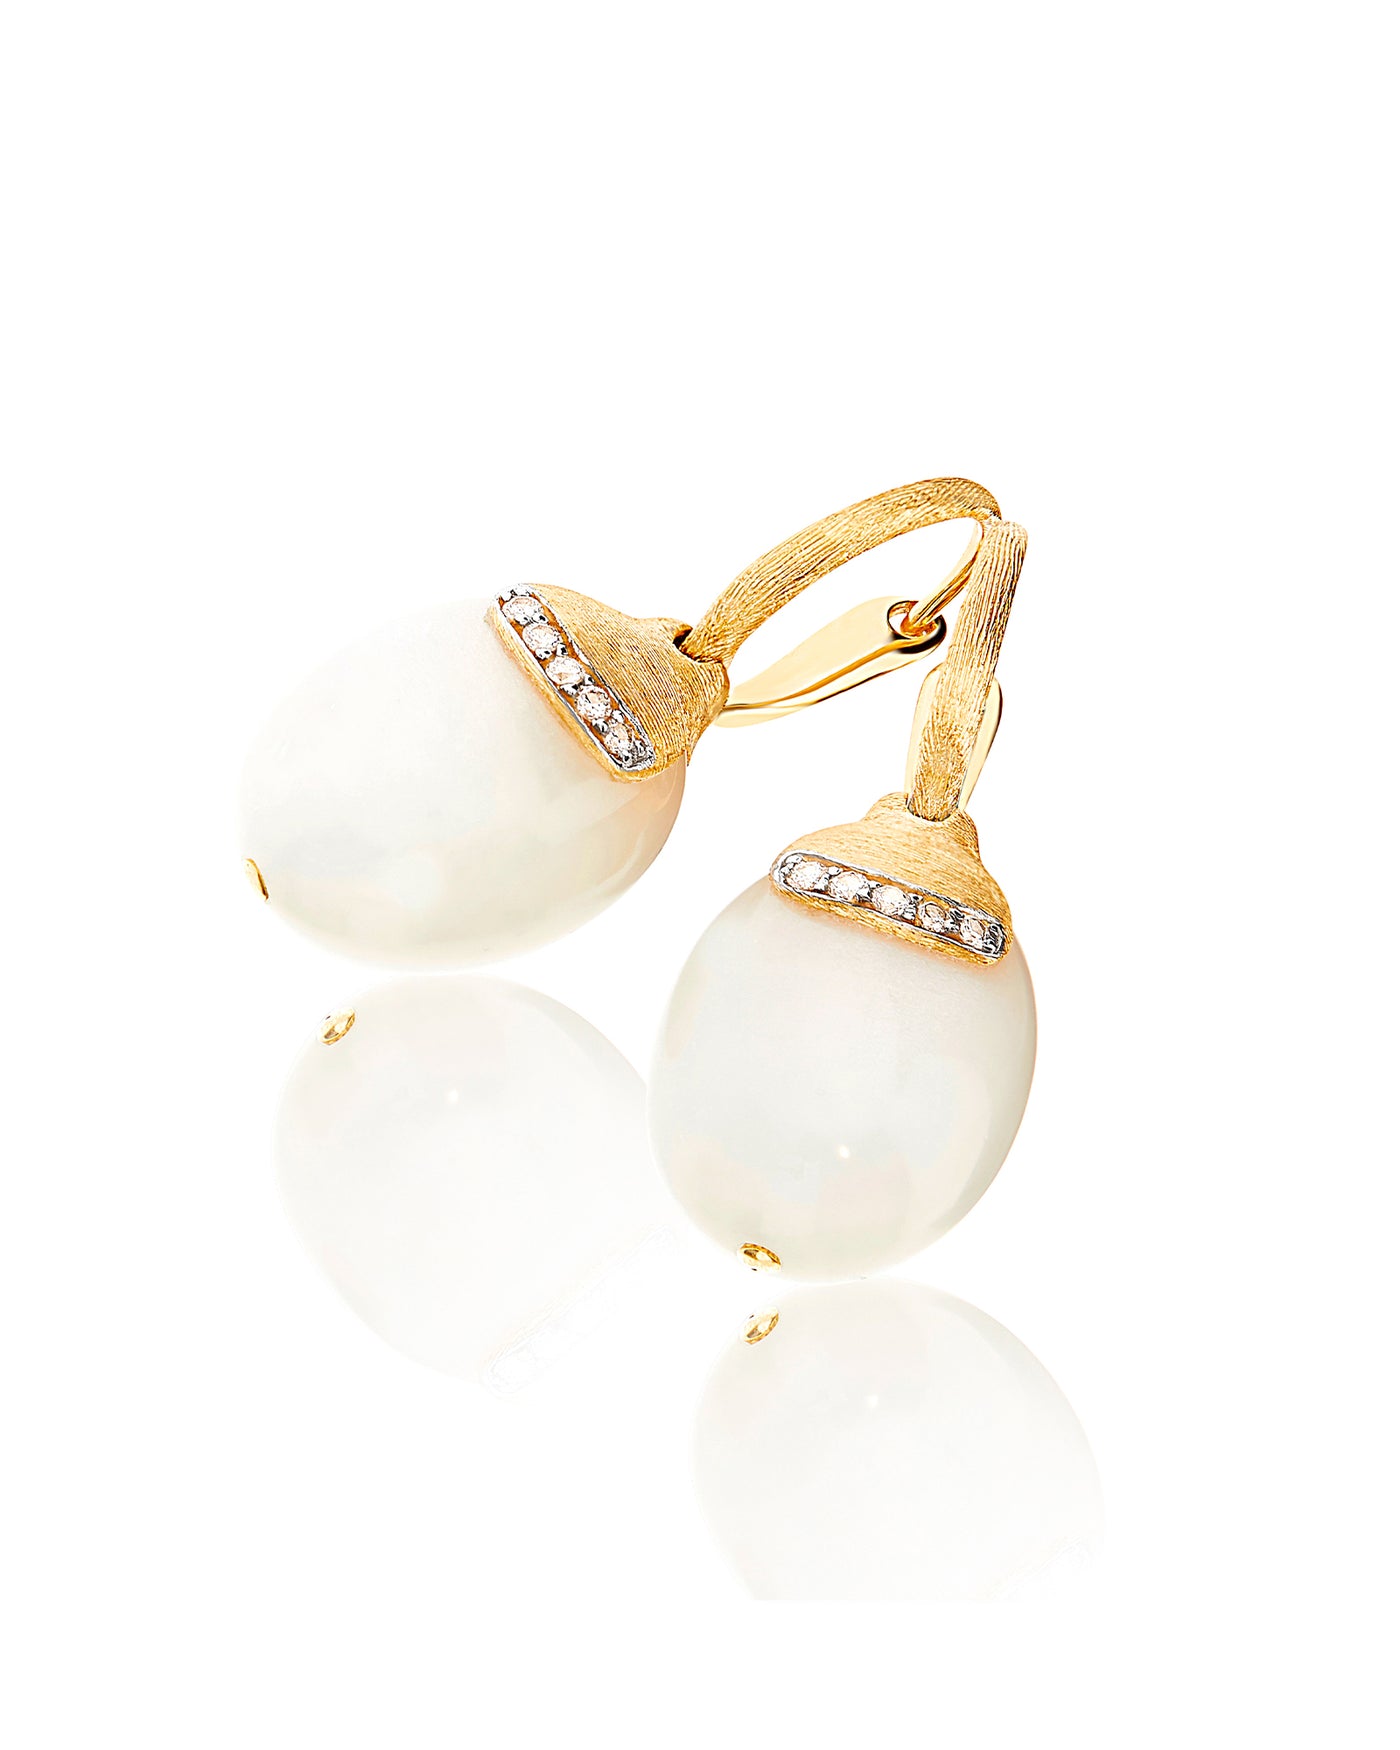 "White desert" ciliegine gold and white moonstone ball drop earrings with diamonds details (large)